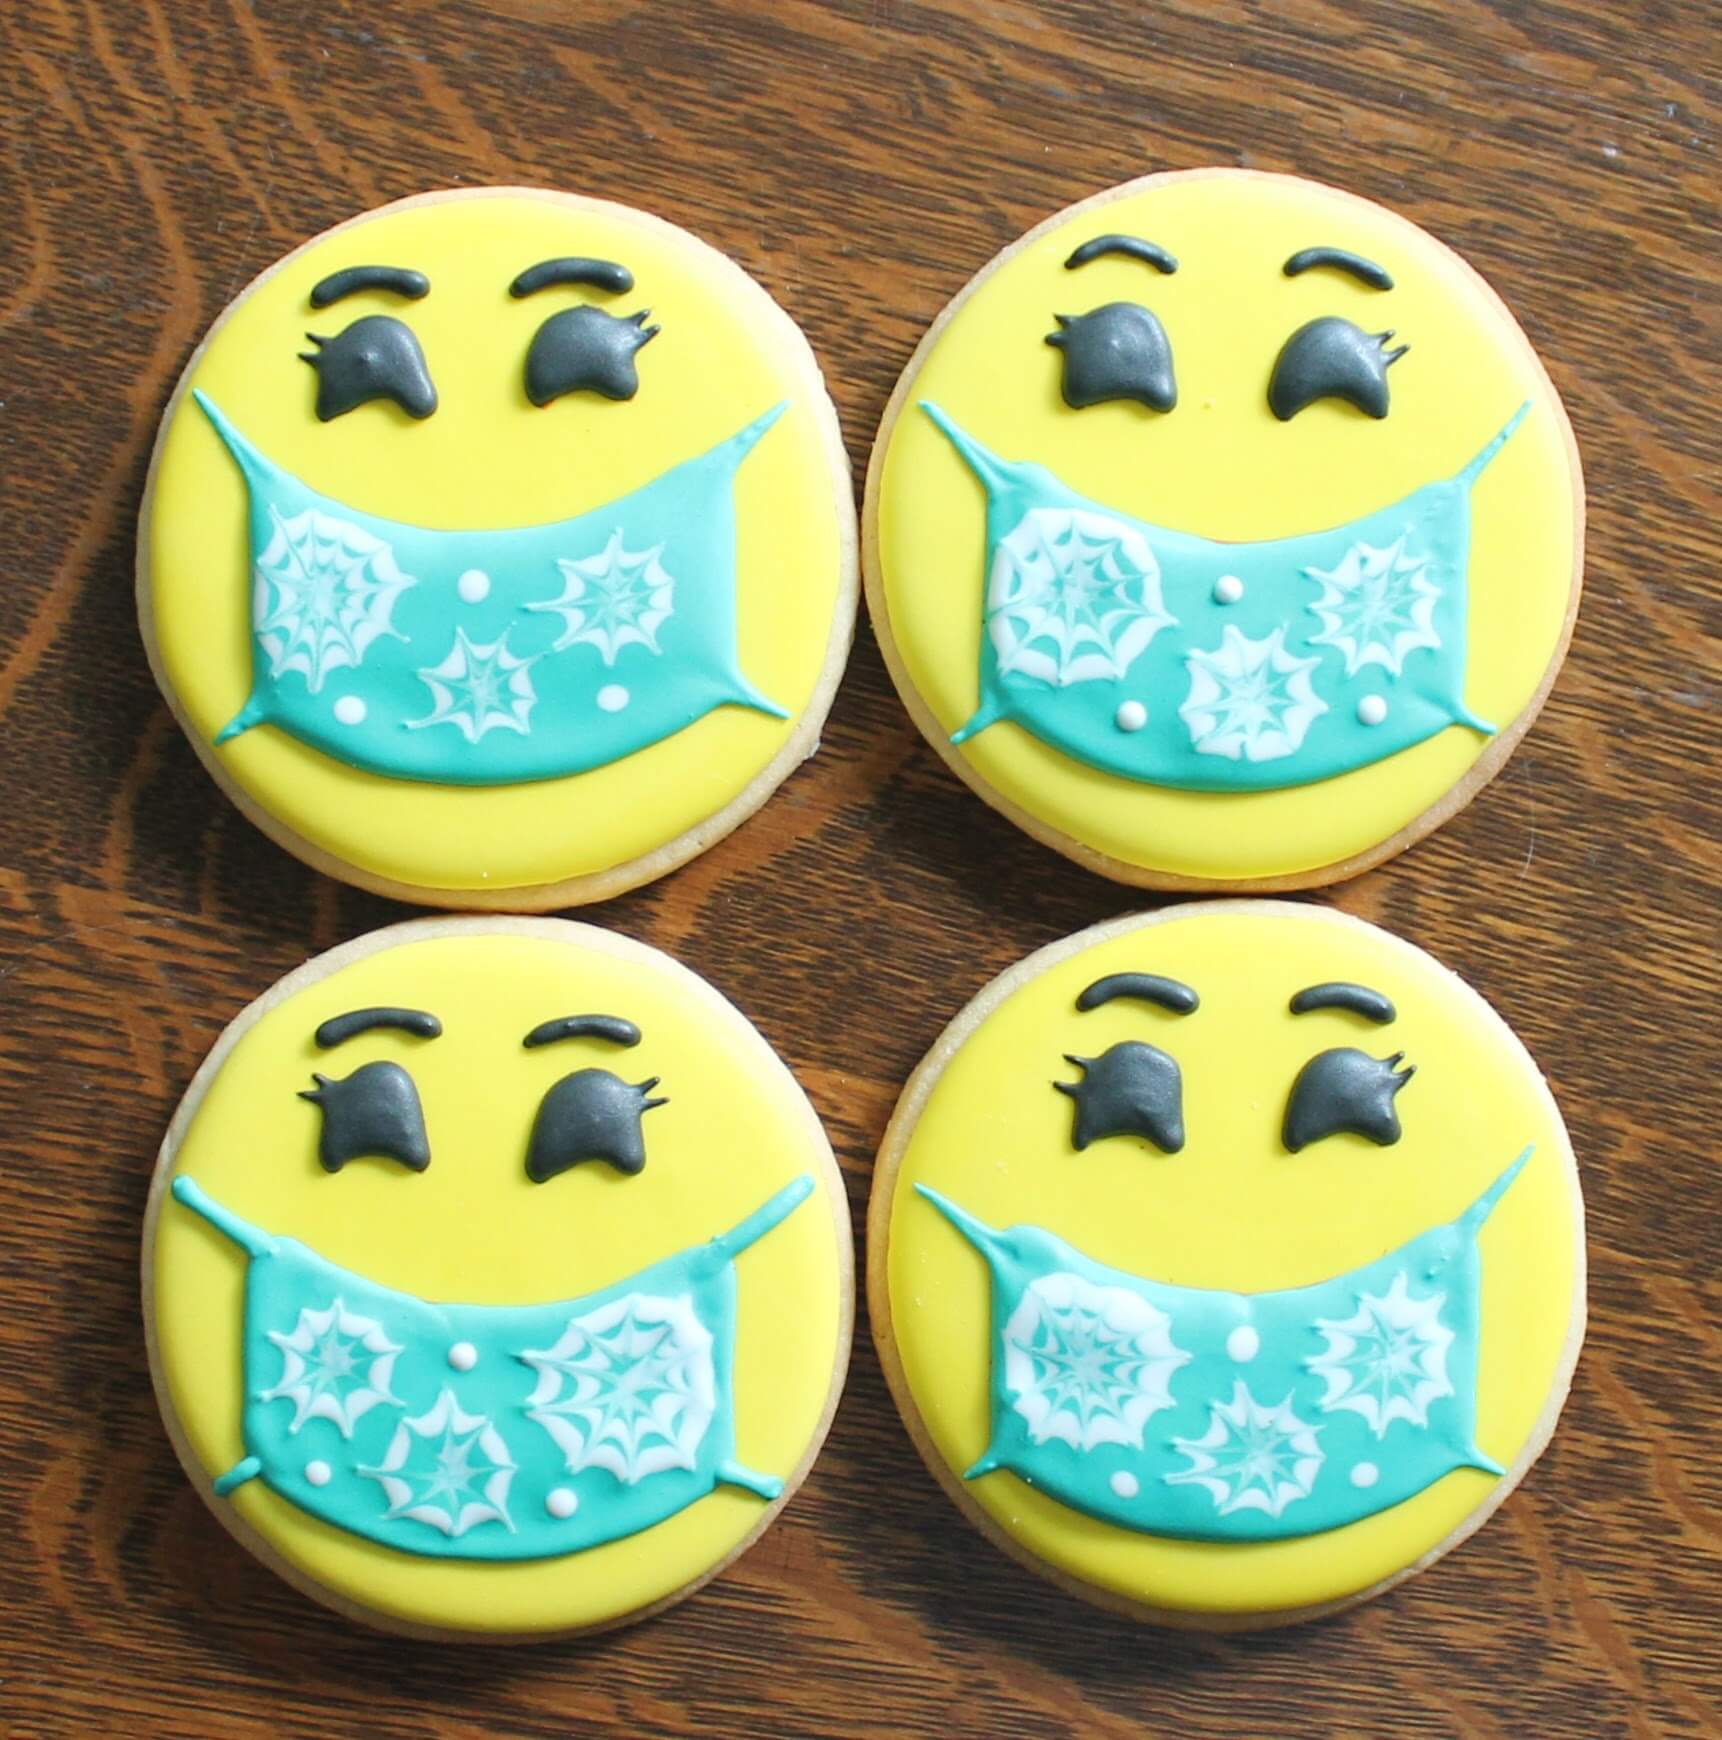 Green Smiley Face Mask Cookies